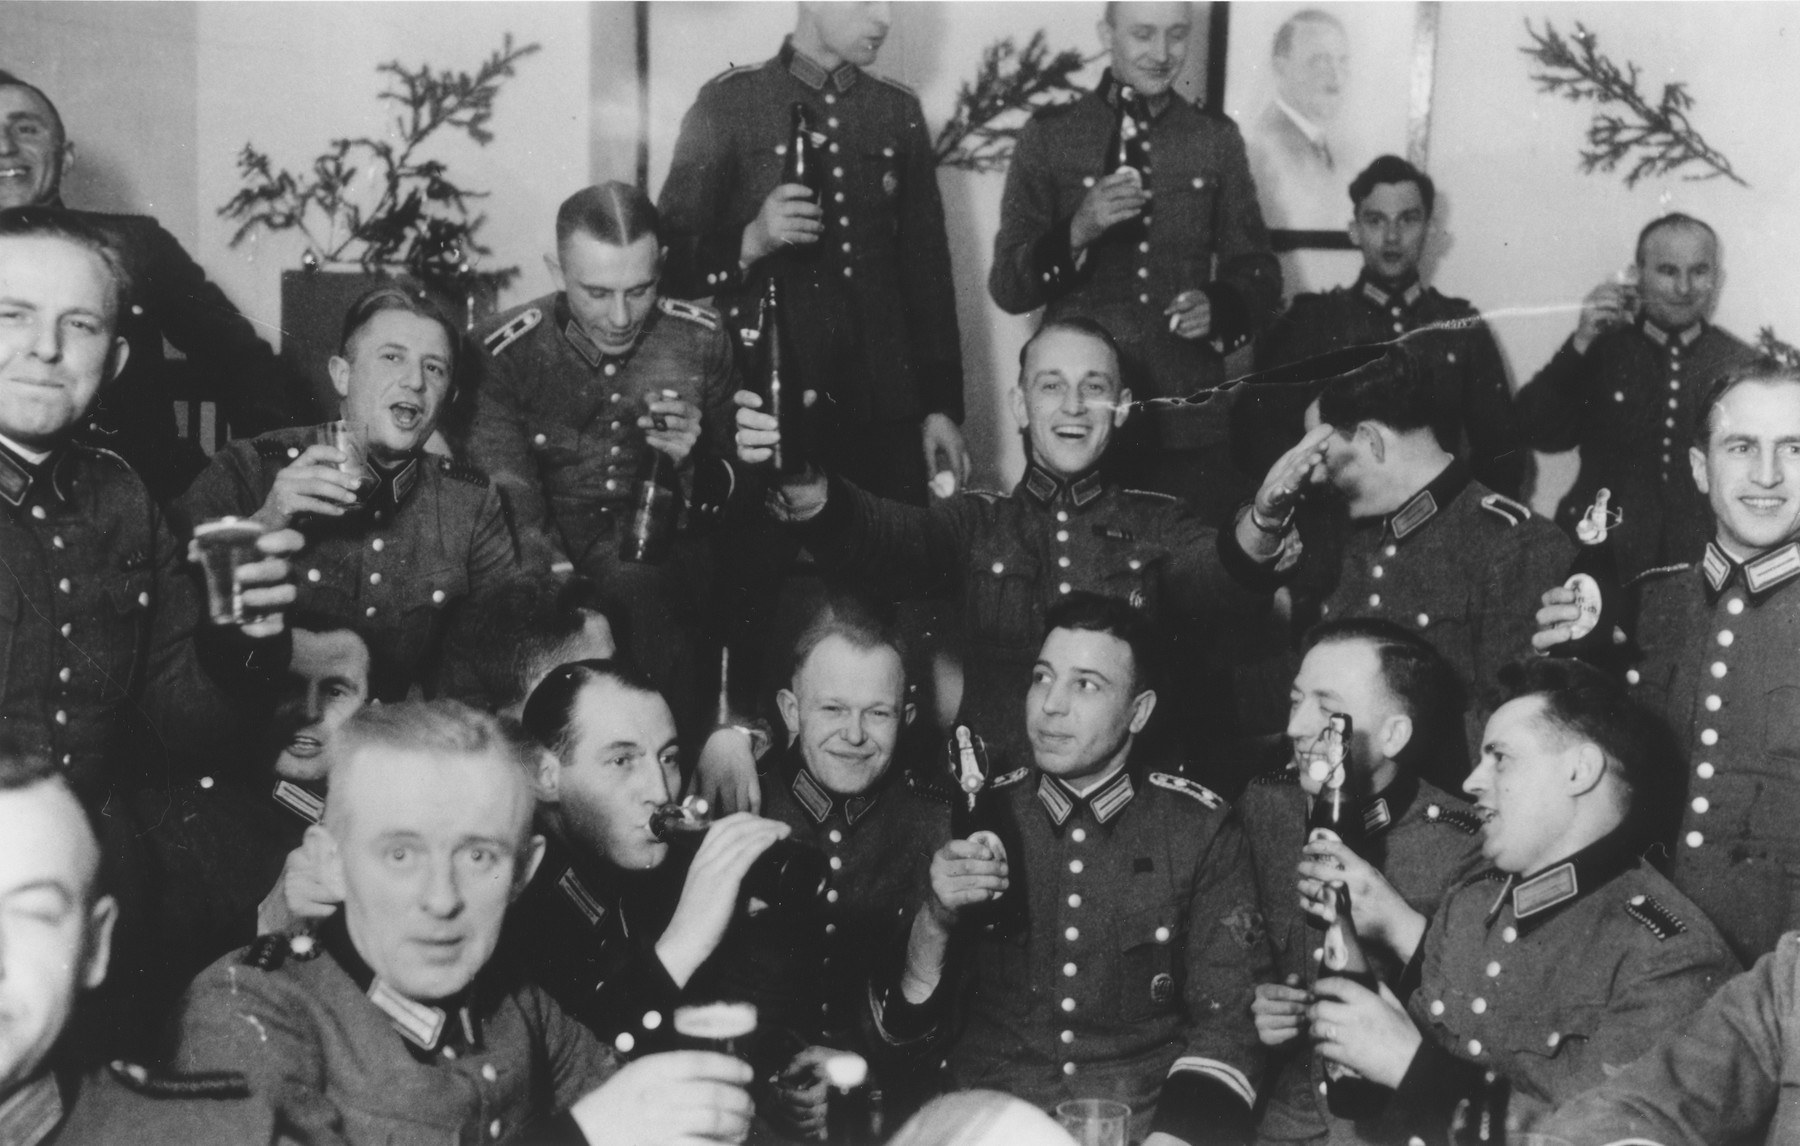 Members of Police Battalion 101 celebrate Christmas in their barracks. 

One image from a photograph album belonging to a member of Police Battalion 101.